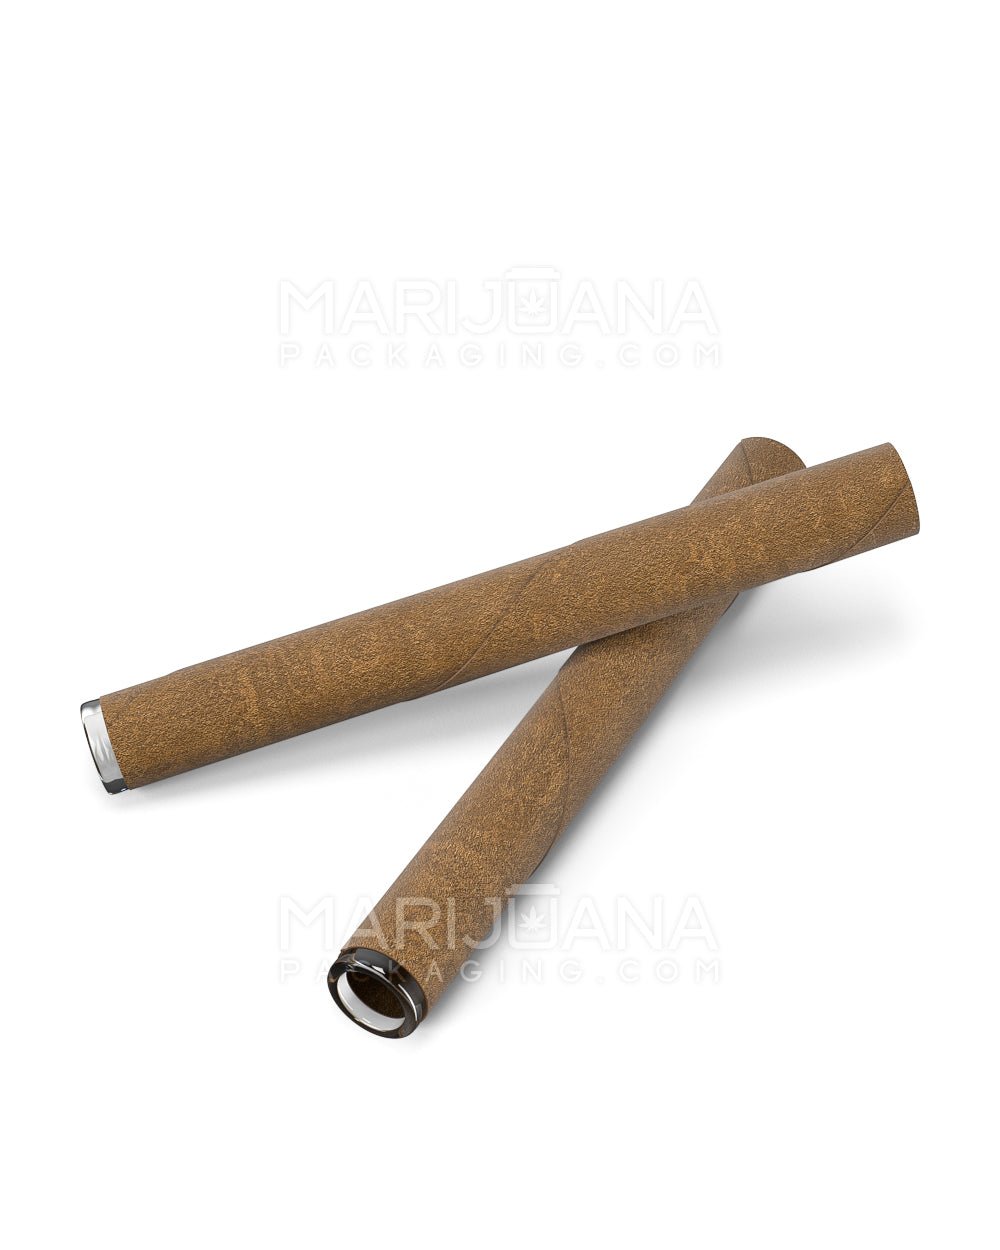 King Size Glass Tipped Wrapped Pre-Rolled Blunt Cones | 109mm - Brown Paper - 80 Count - 2